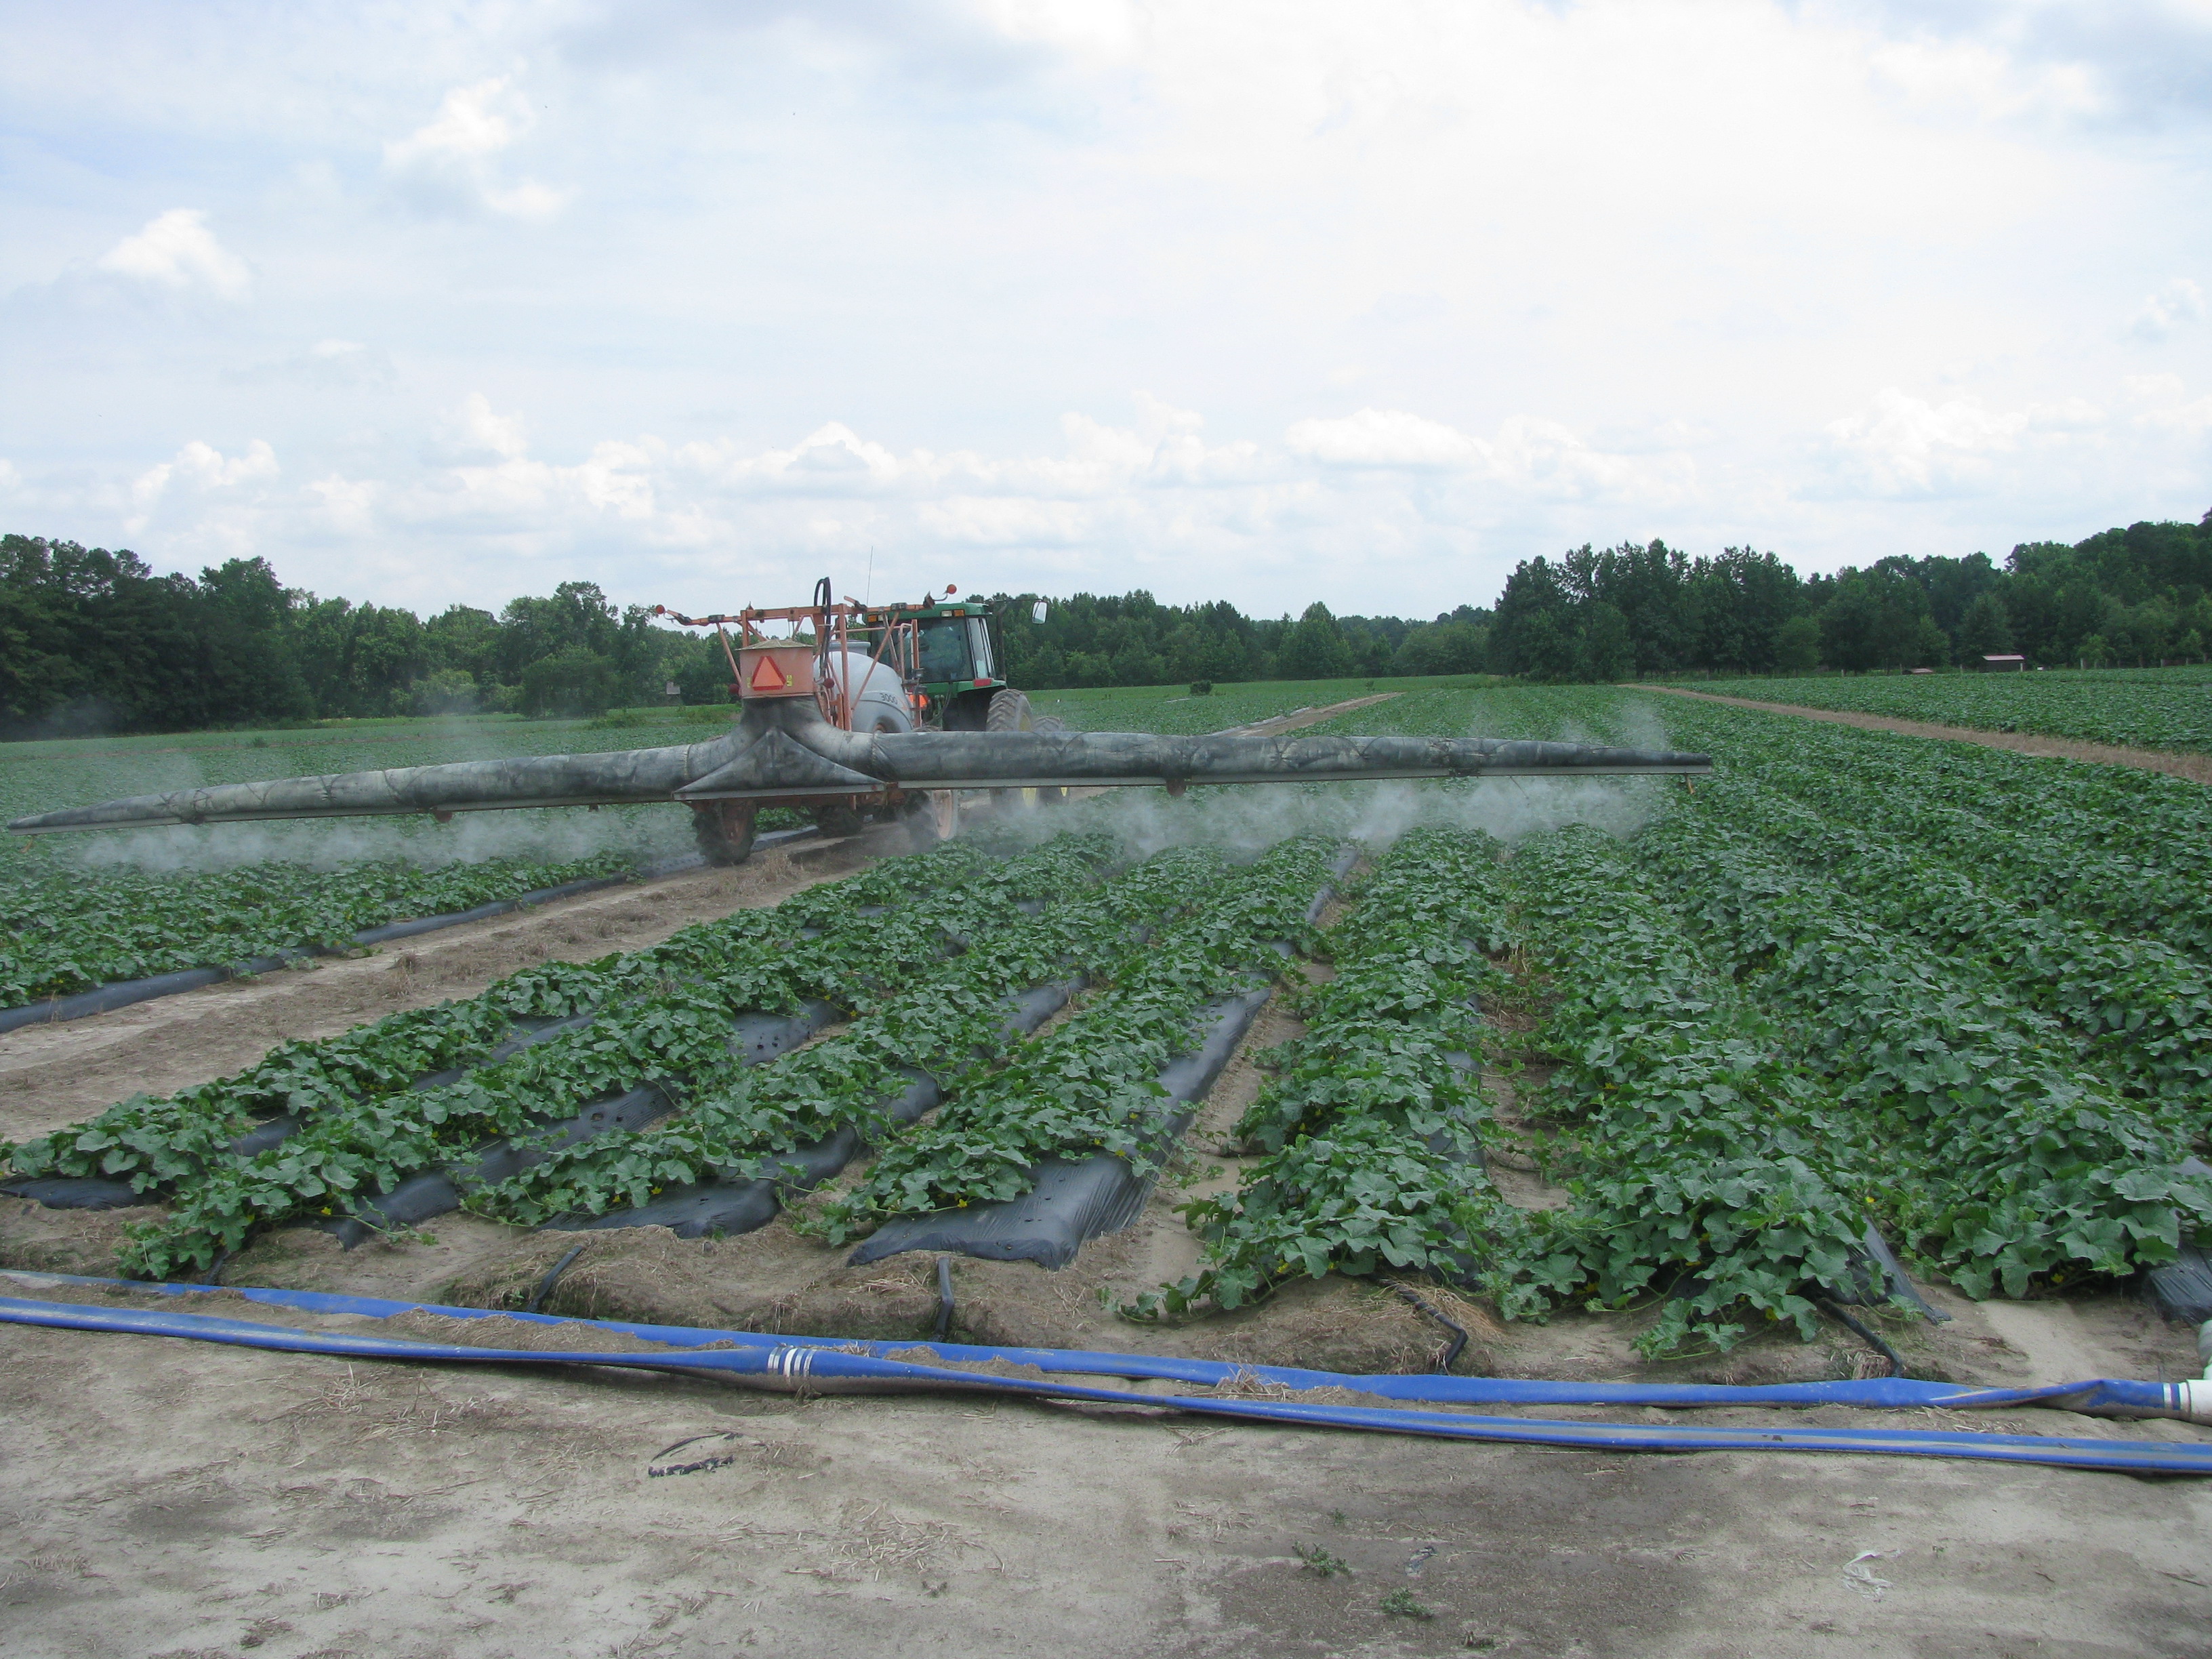 An important ingredient for Vegetable production - a good sprayer